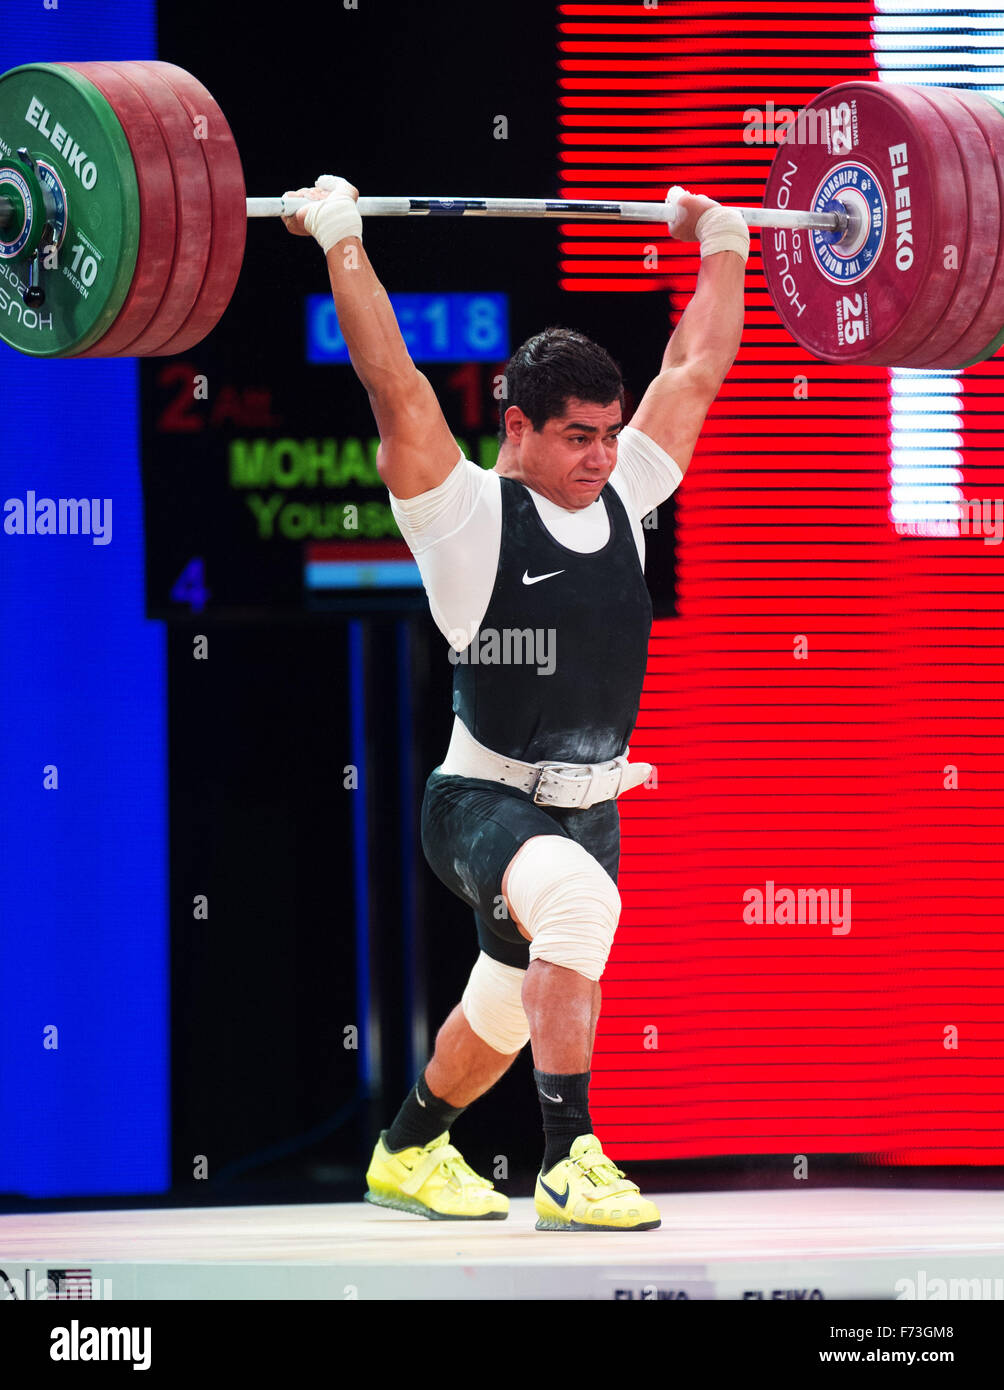 Houston, Texas, USA. 24th Nov, 2015. Youssef Mohamed Ihab lifts 197 kilograms in the clean and jerk. Ihab competed in the Men's 77 kilogram weight class at the World Weightlifting Championships in   Houston, Texas. Brent Clark/Alamy Live News Stock Photo